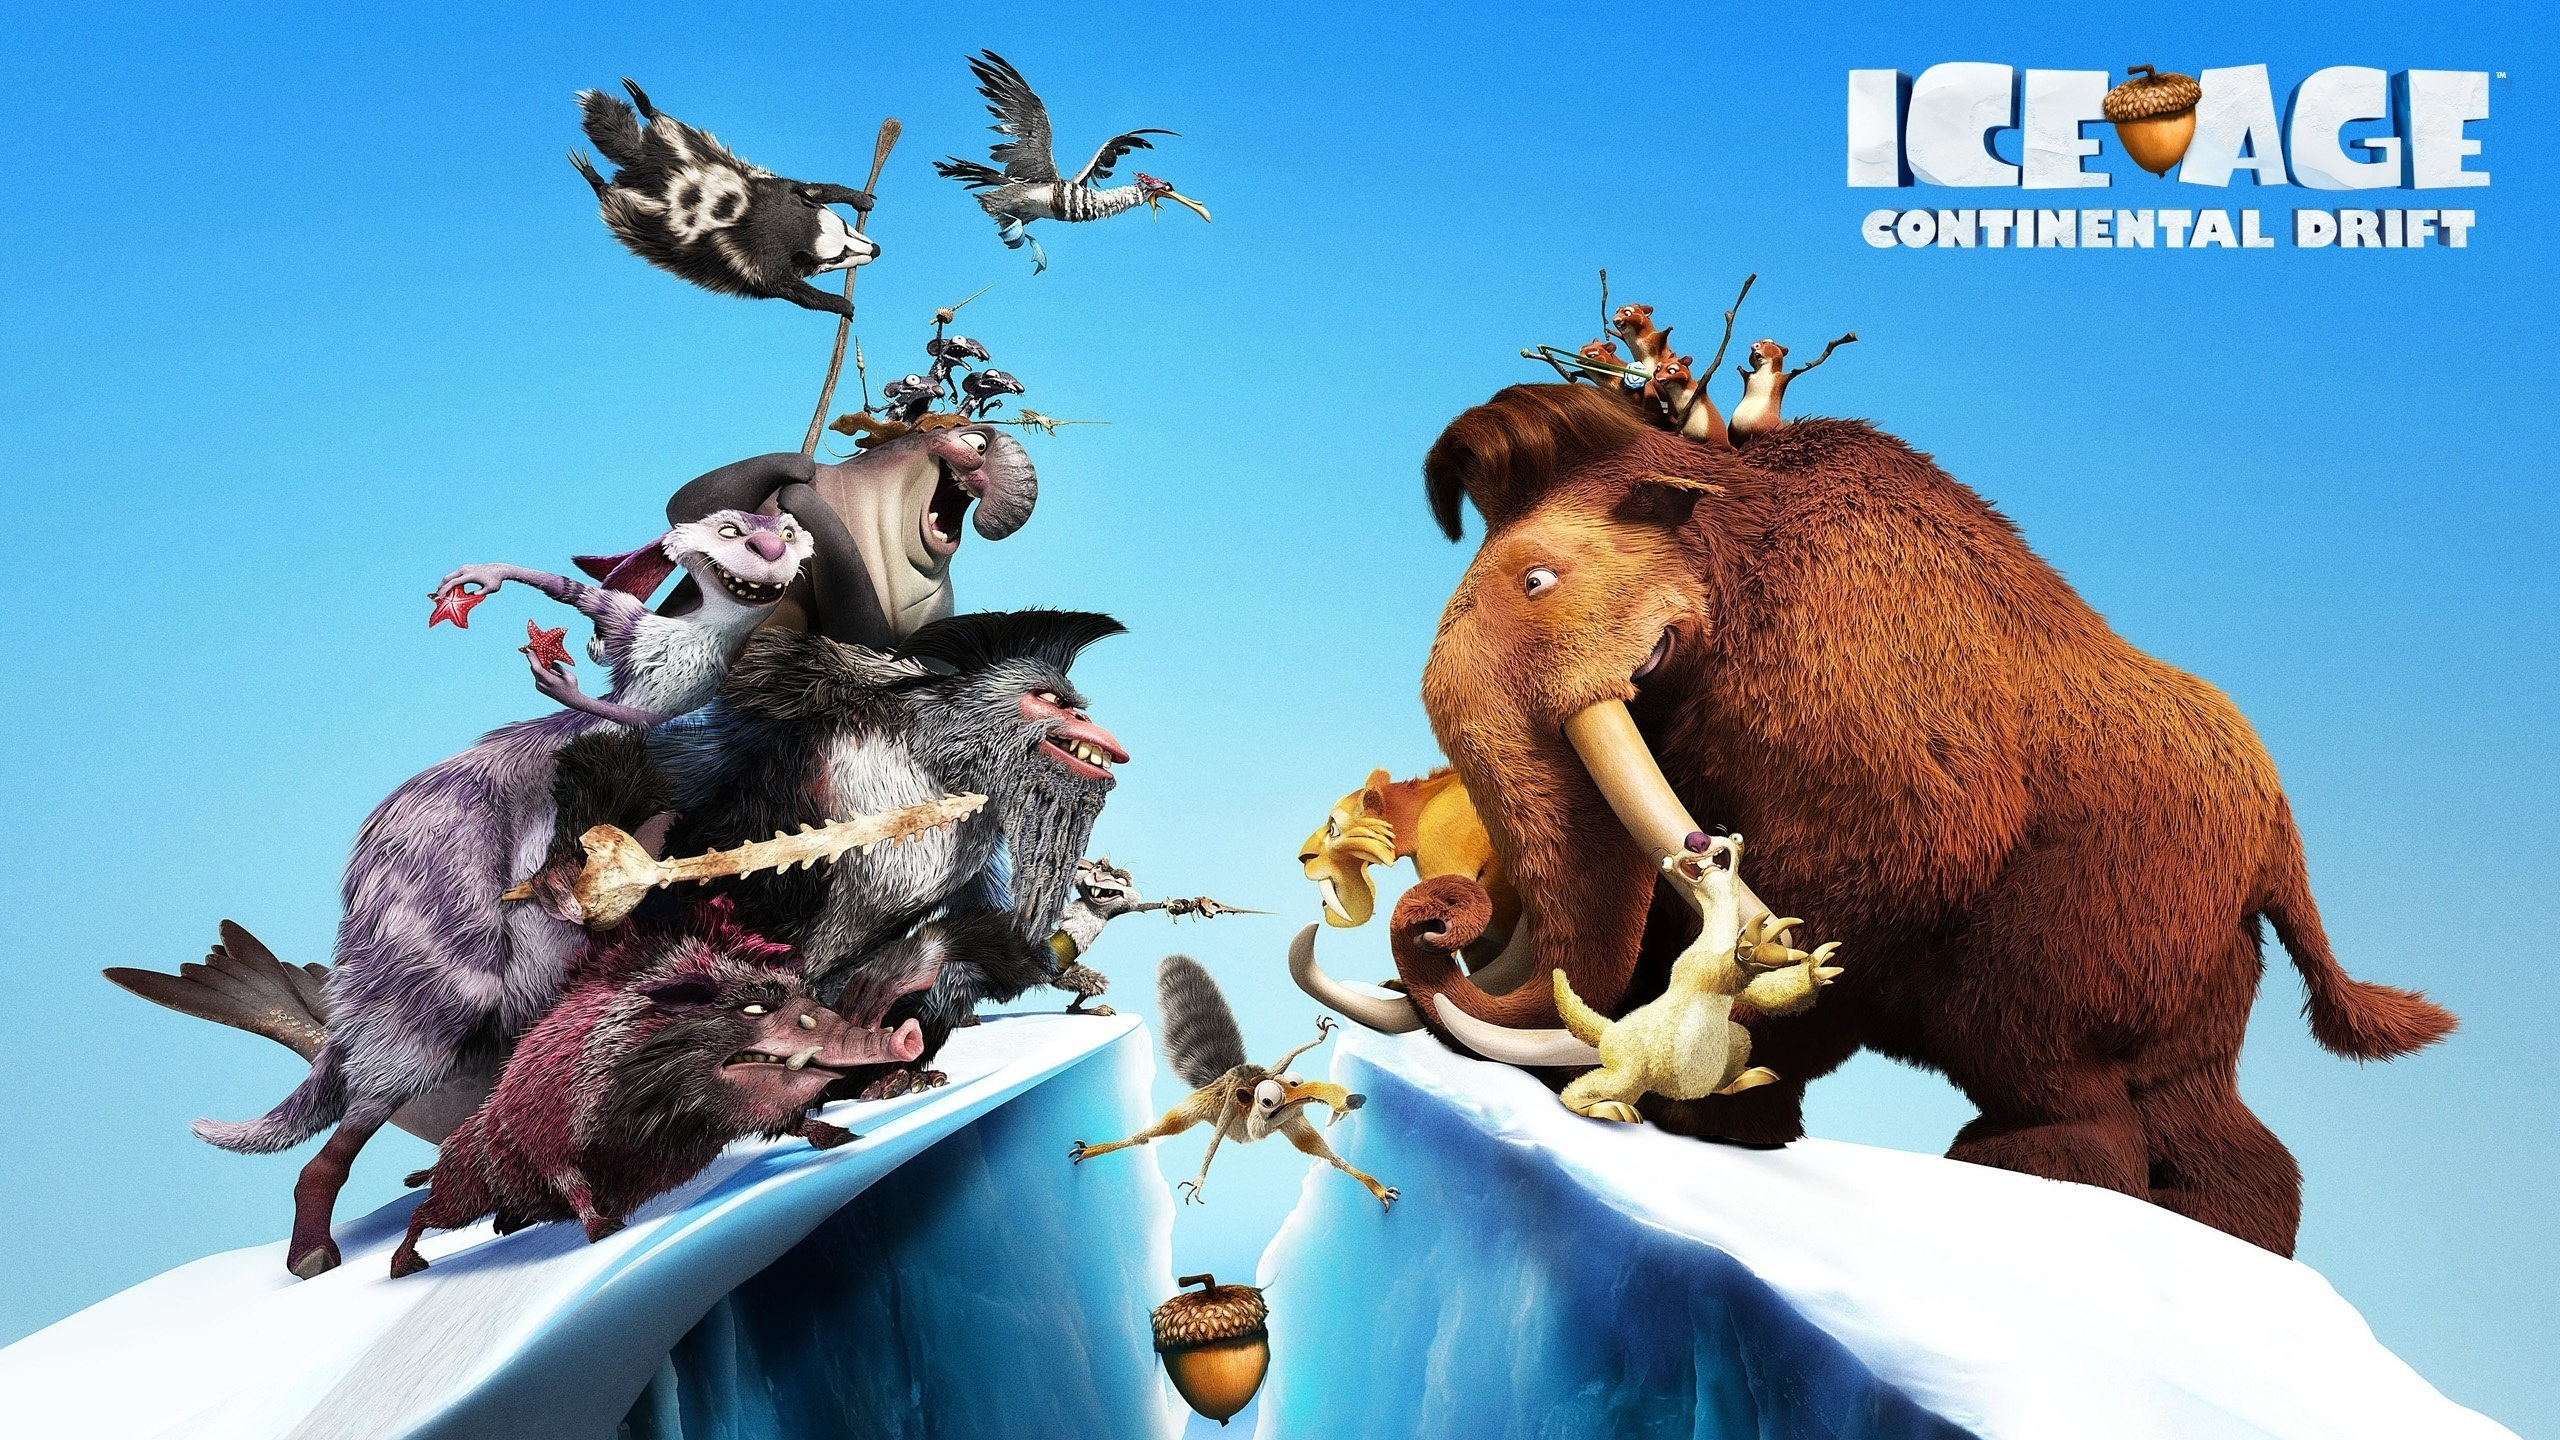 Ice Age, Memorable characters, Hilarious moments, Family-friendly entertainment, 2560x1440 HD Desktop